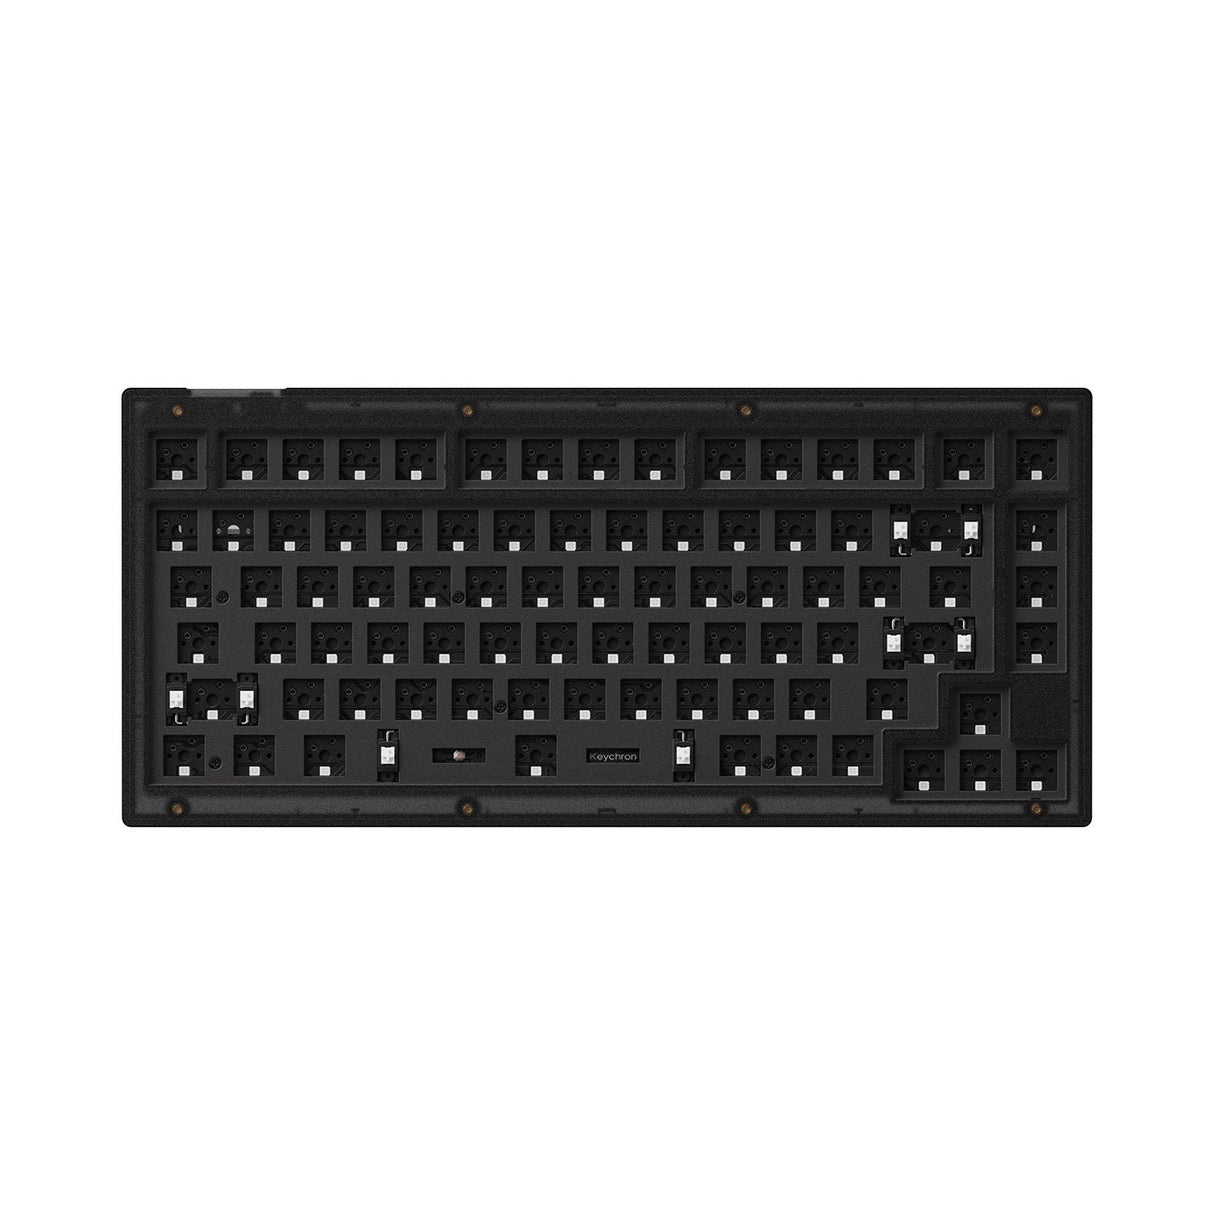 Keychron Travel Pouch – Keychron  Mechanical Keyboards for Mac, Windows  and Android